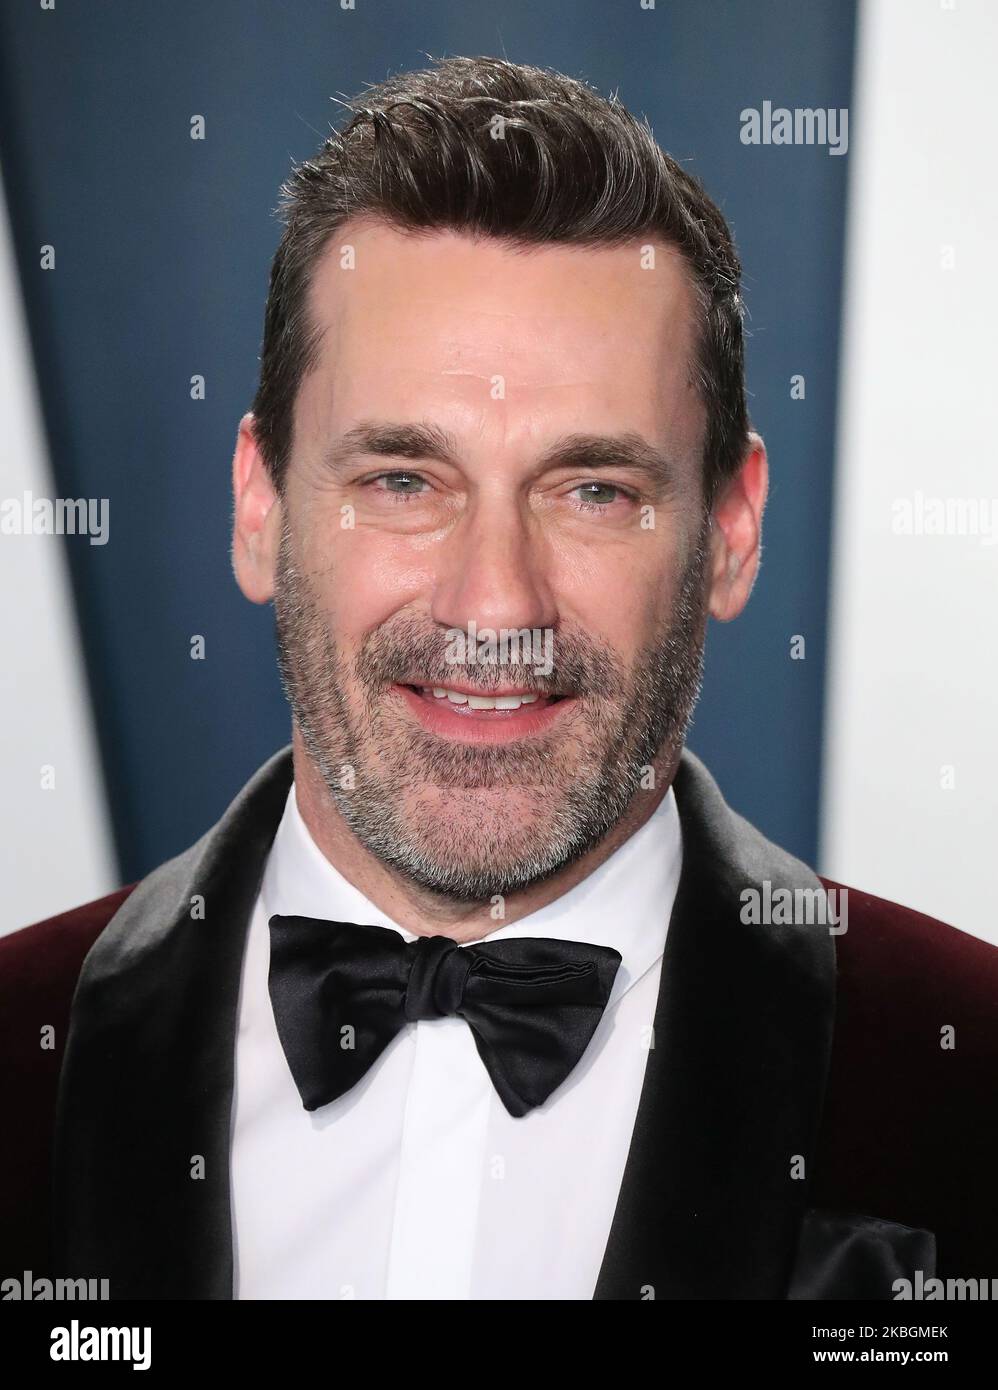 BEVERLY HILLS, LOS ANGELES, CALIFORNIA, USA - FEBRUARY 09: Jon Hamm arrives at the 2020 Vanity Fair Oscar Party held at the Wallis Annenberg Center for the Performing Arts on February 9, 2020 in Beverly Hills, Los Angeles, California, United States. (Photo by Xavier Collin/Image Press Agency/NurPhoto) Stock Photo